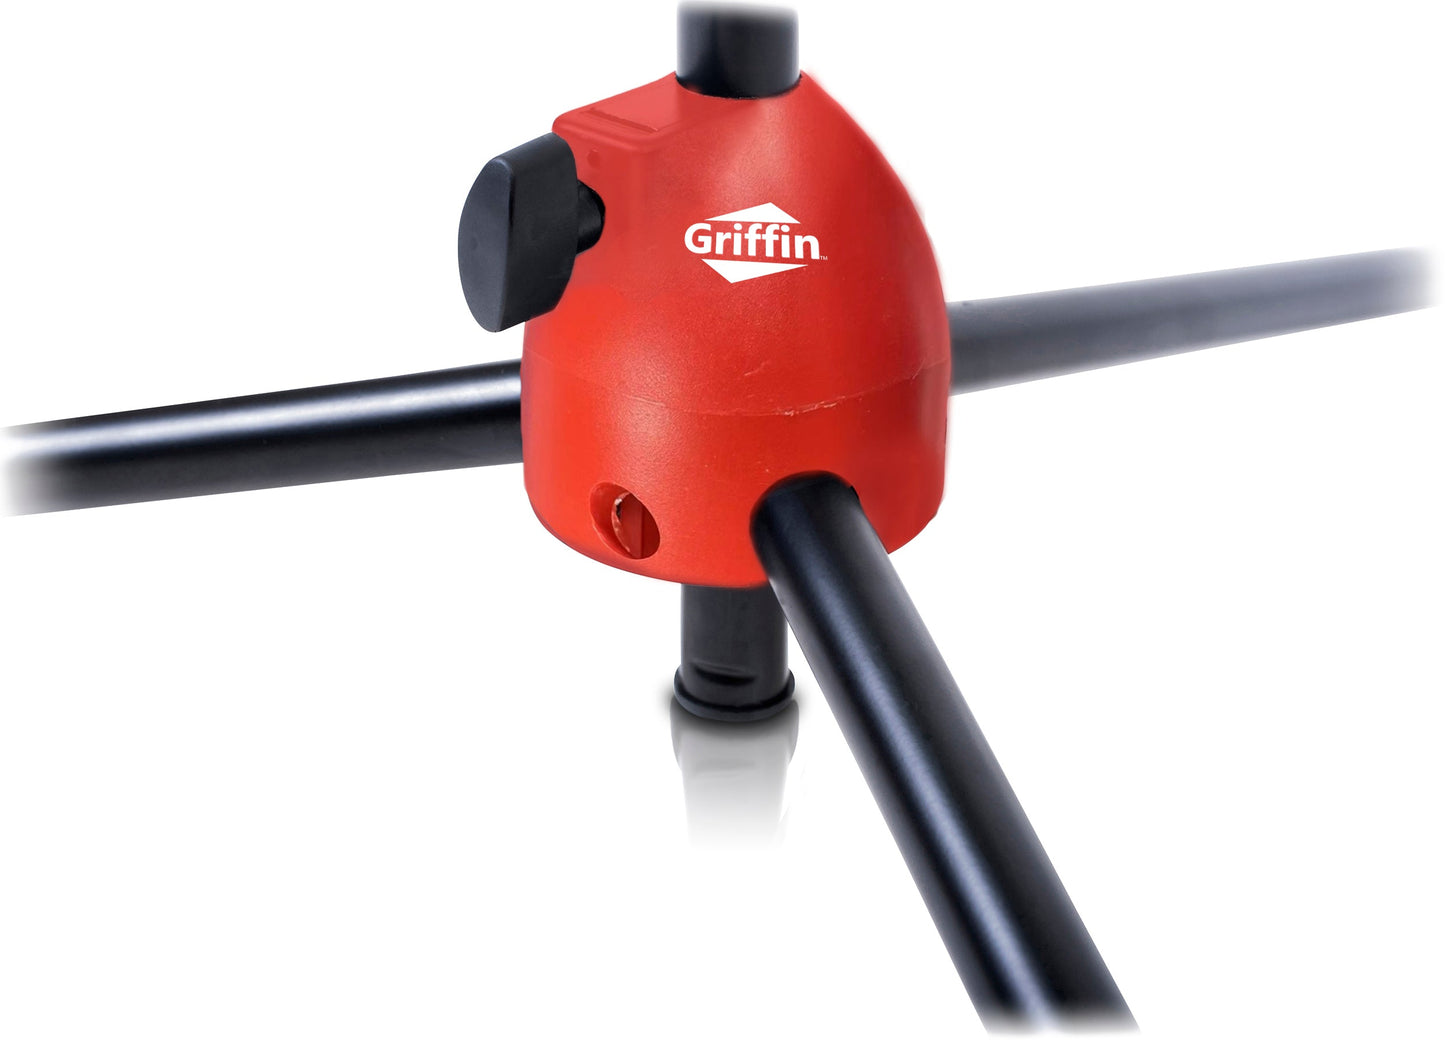 Microphone Boom Stand with Mic Clip Adapter (Pack of 6) by GRIFFIN - Adjustable Holder Mount For Studio Recording Accessories, Singing Vocal Karaoke